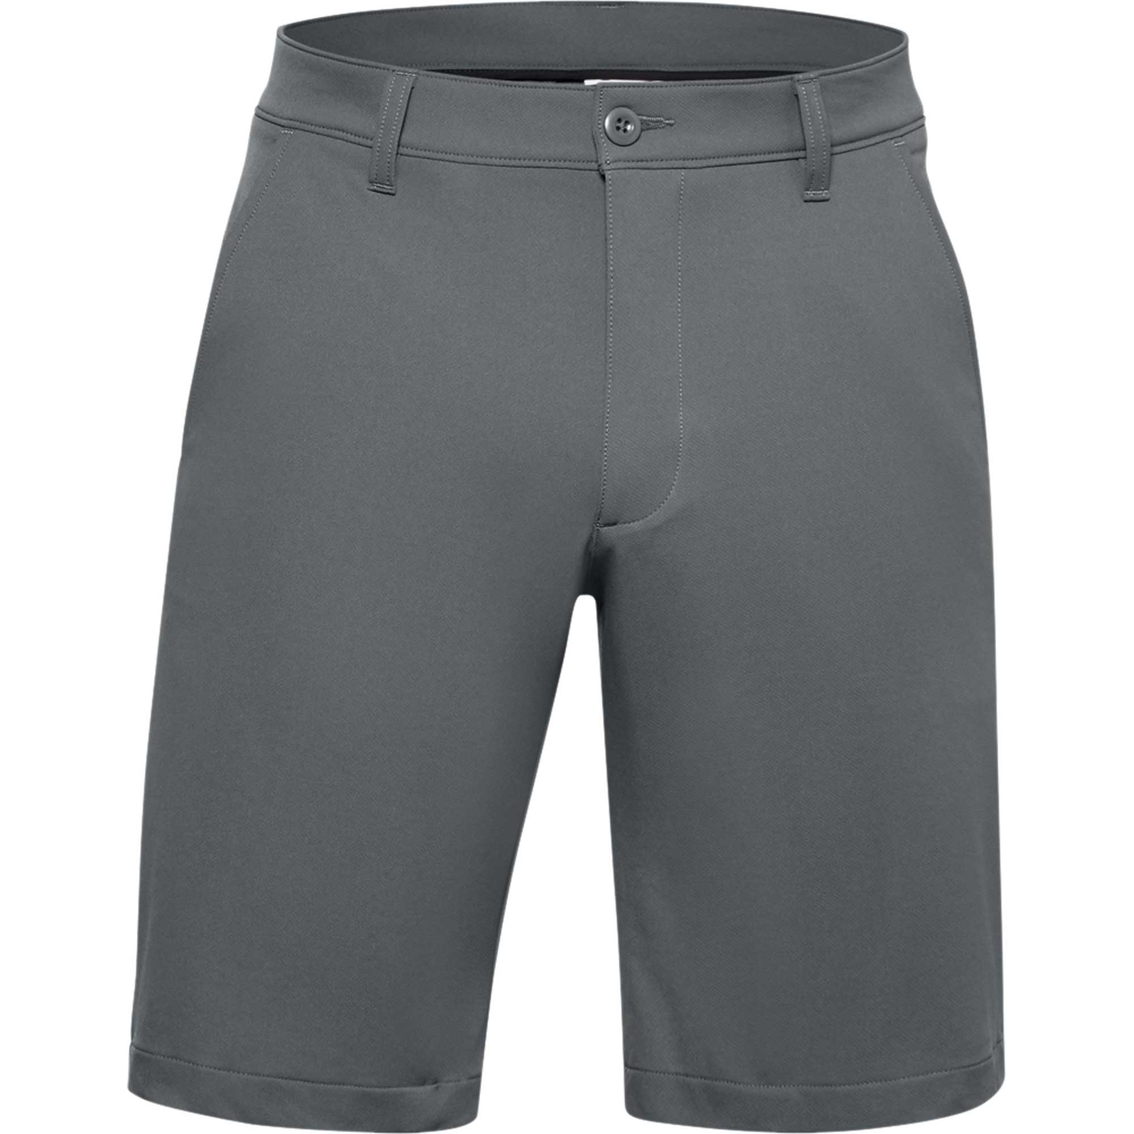 Under Armour 10 in. Tech Shorts - Image 5 of 8